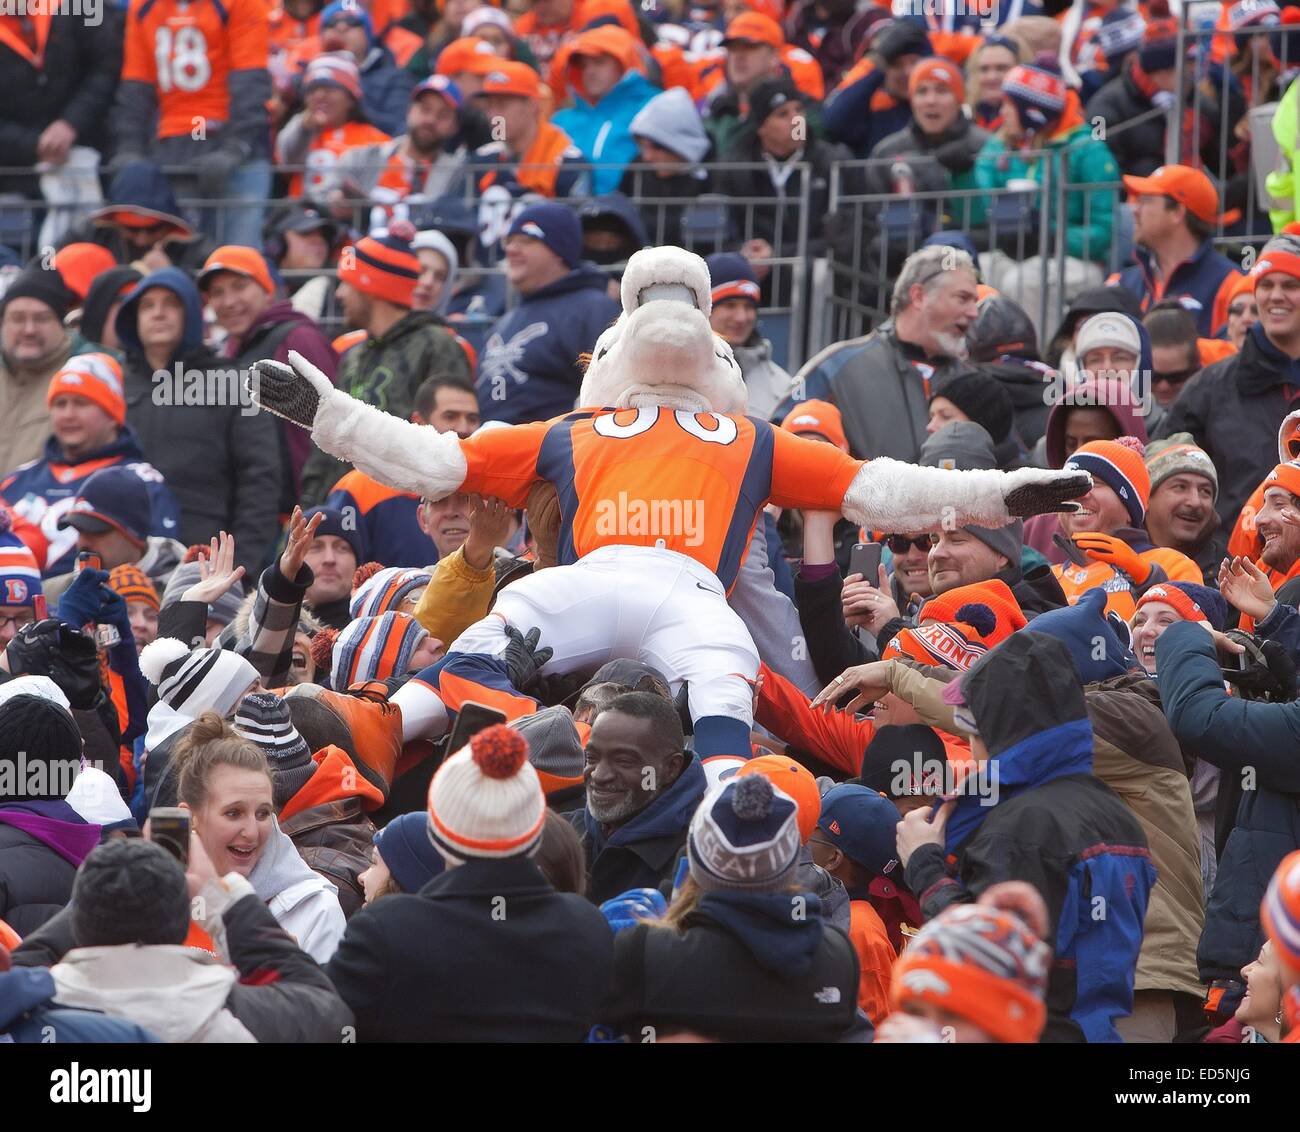 Denver, Colorado, USA. 28th Dec, 2014. Broncos Mascot Miles, center, gets passed around in the crowd during the 1st. half at Sports Authority Field at Mile High Sunday afternoon. Broncos beat the Raiders 47-14. Credit:  Hector Acevedo/ZUMA Wire/Alamy Live News Stock Photo